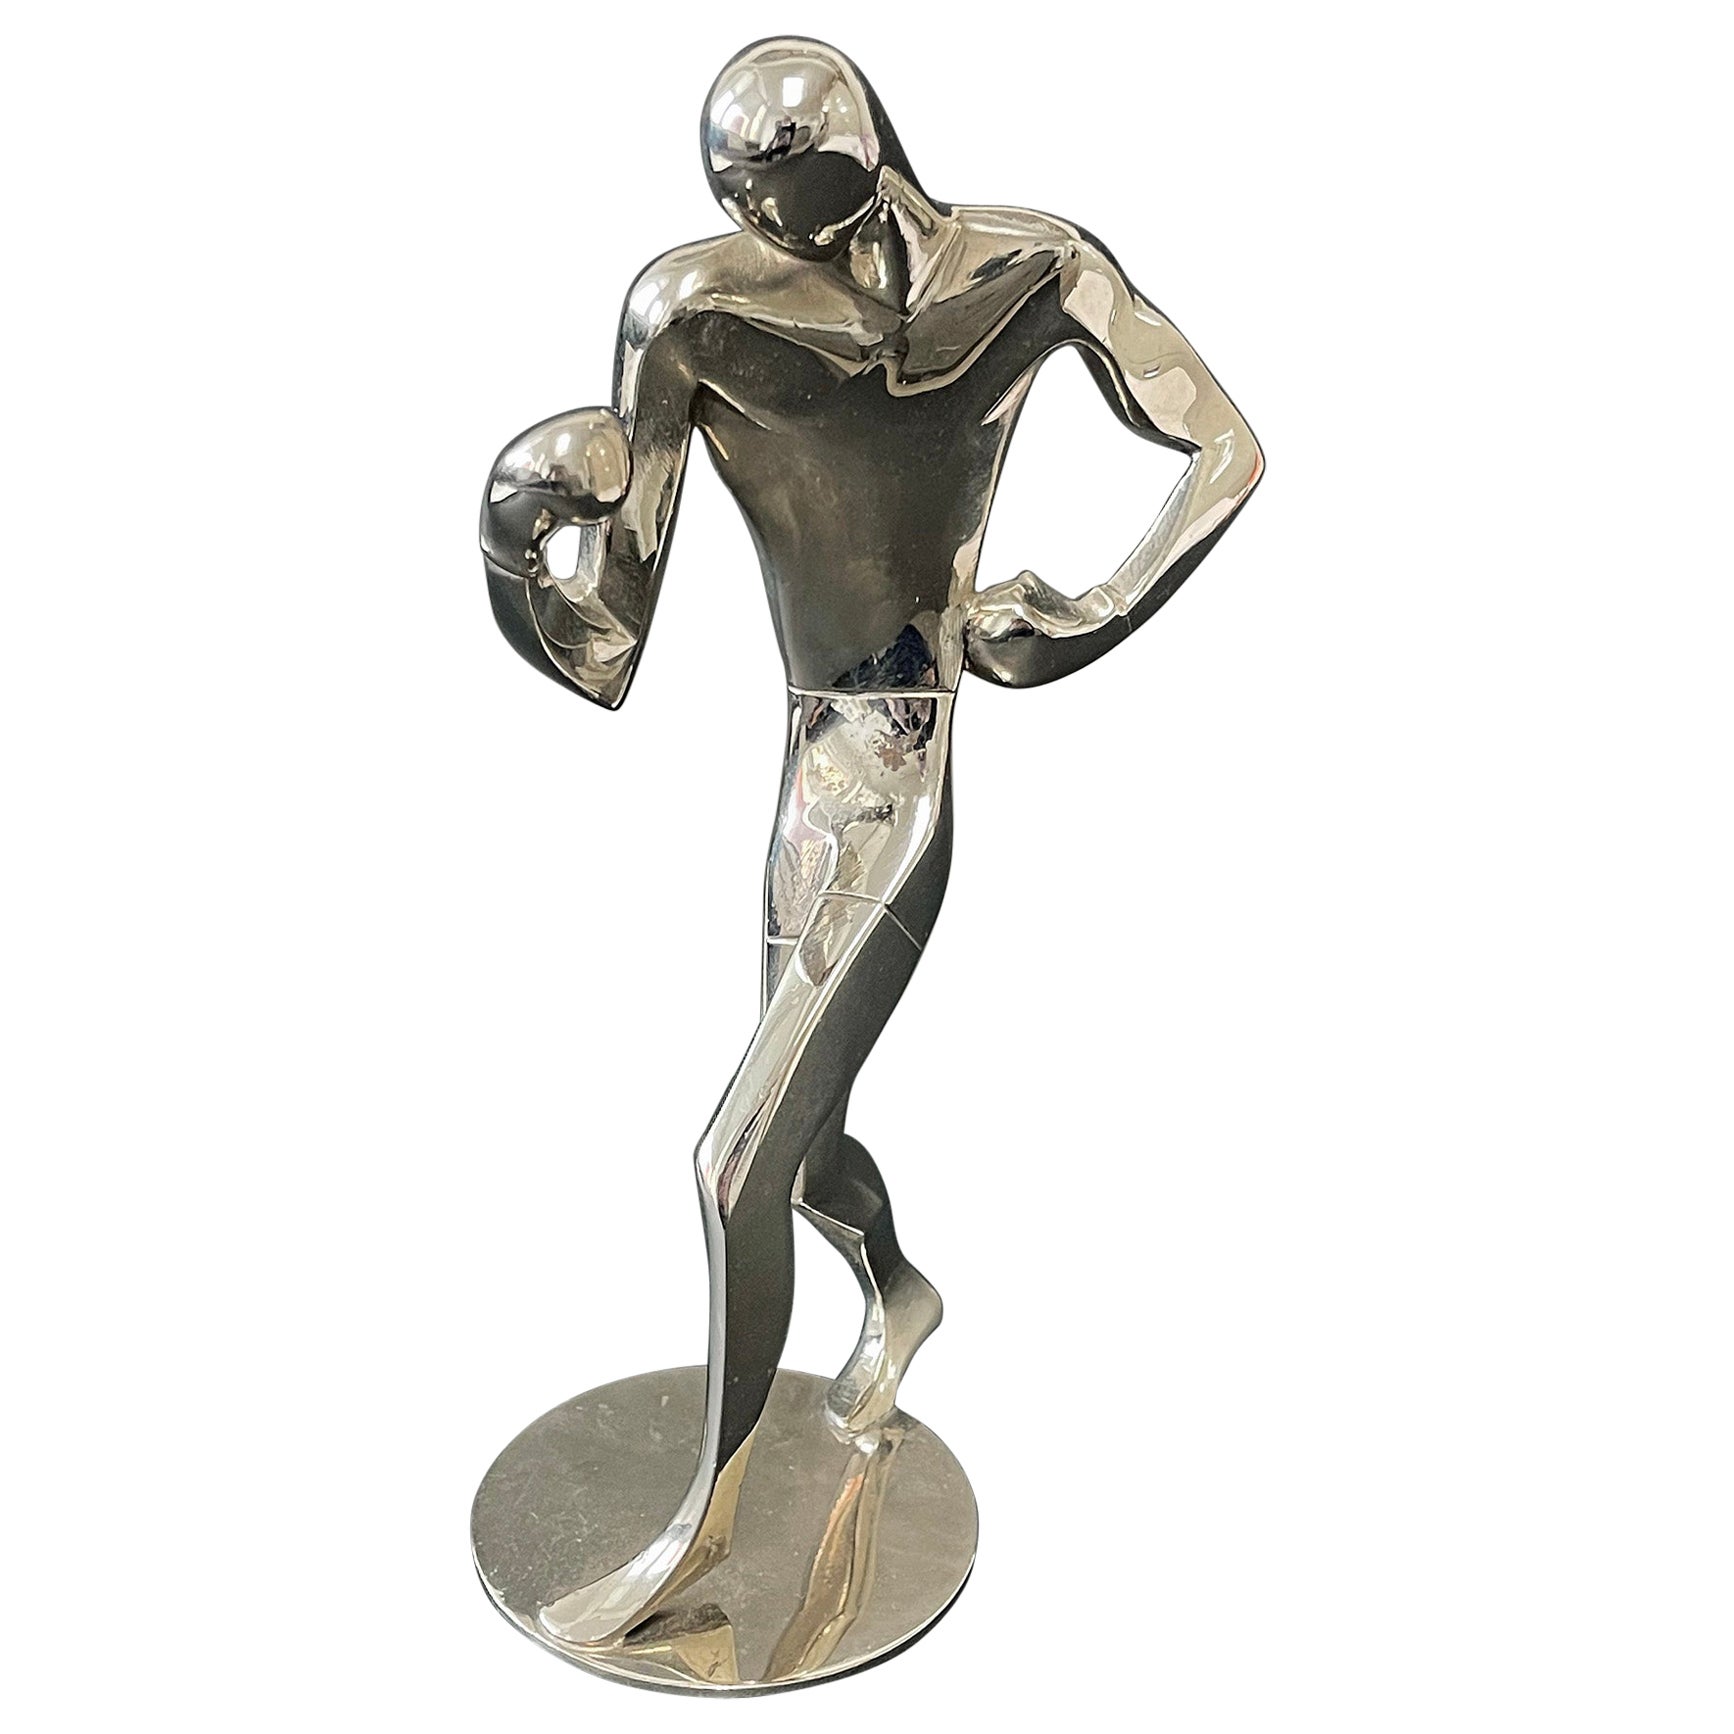 "Right Jab, " Classic Art Deco Sculpture of Boxer, Nickel Finish by Hagenauer For Sale